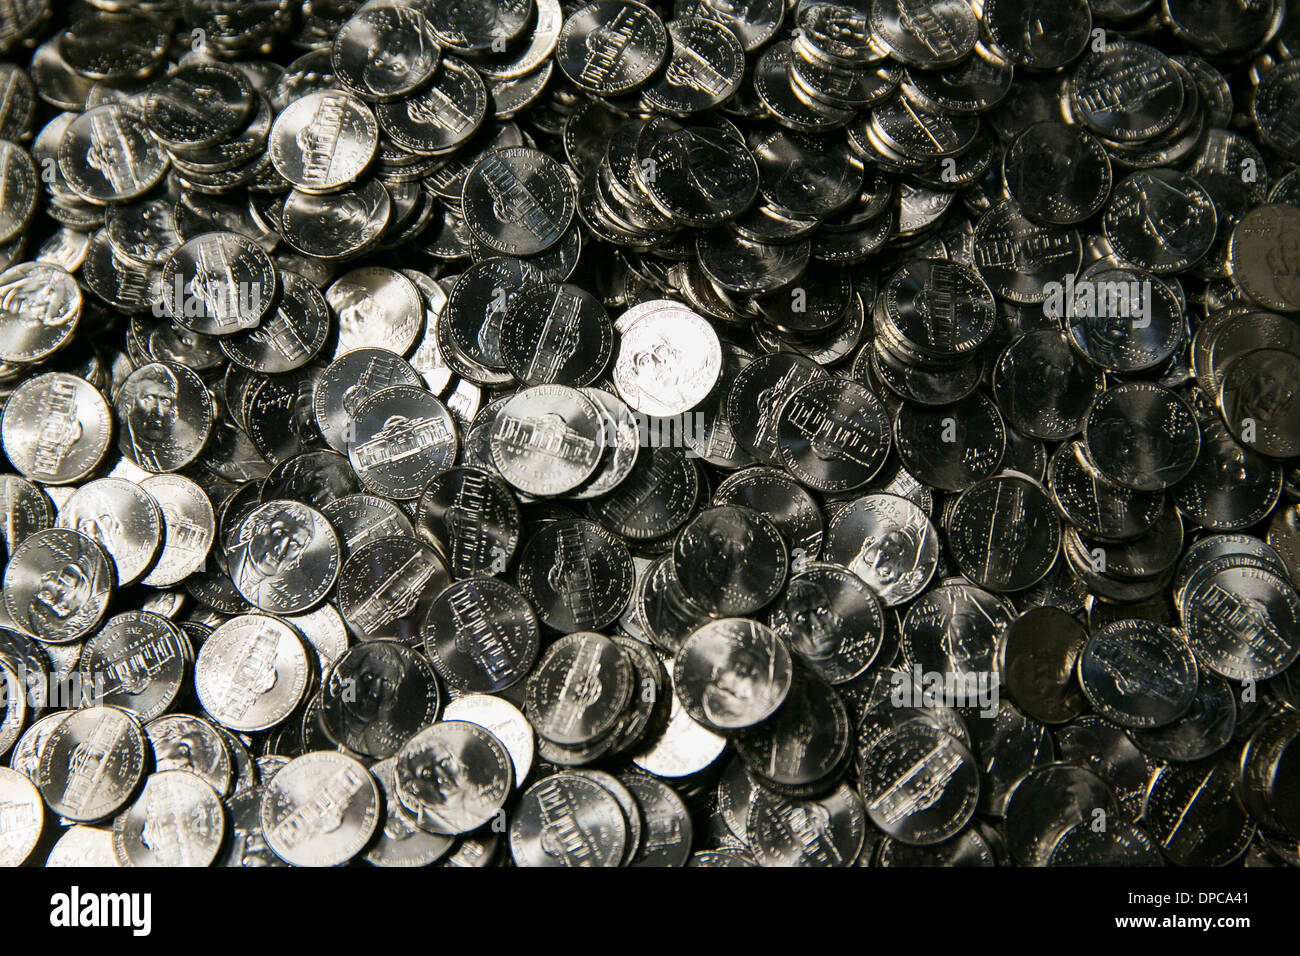 Nickel manufacturing at the Philadelphia branch of the United States Mint. Stock Photo